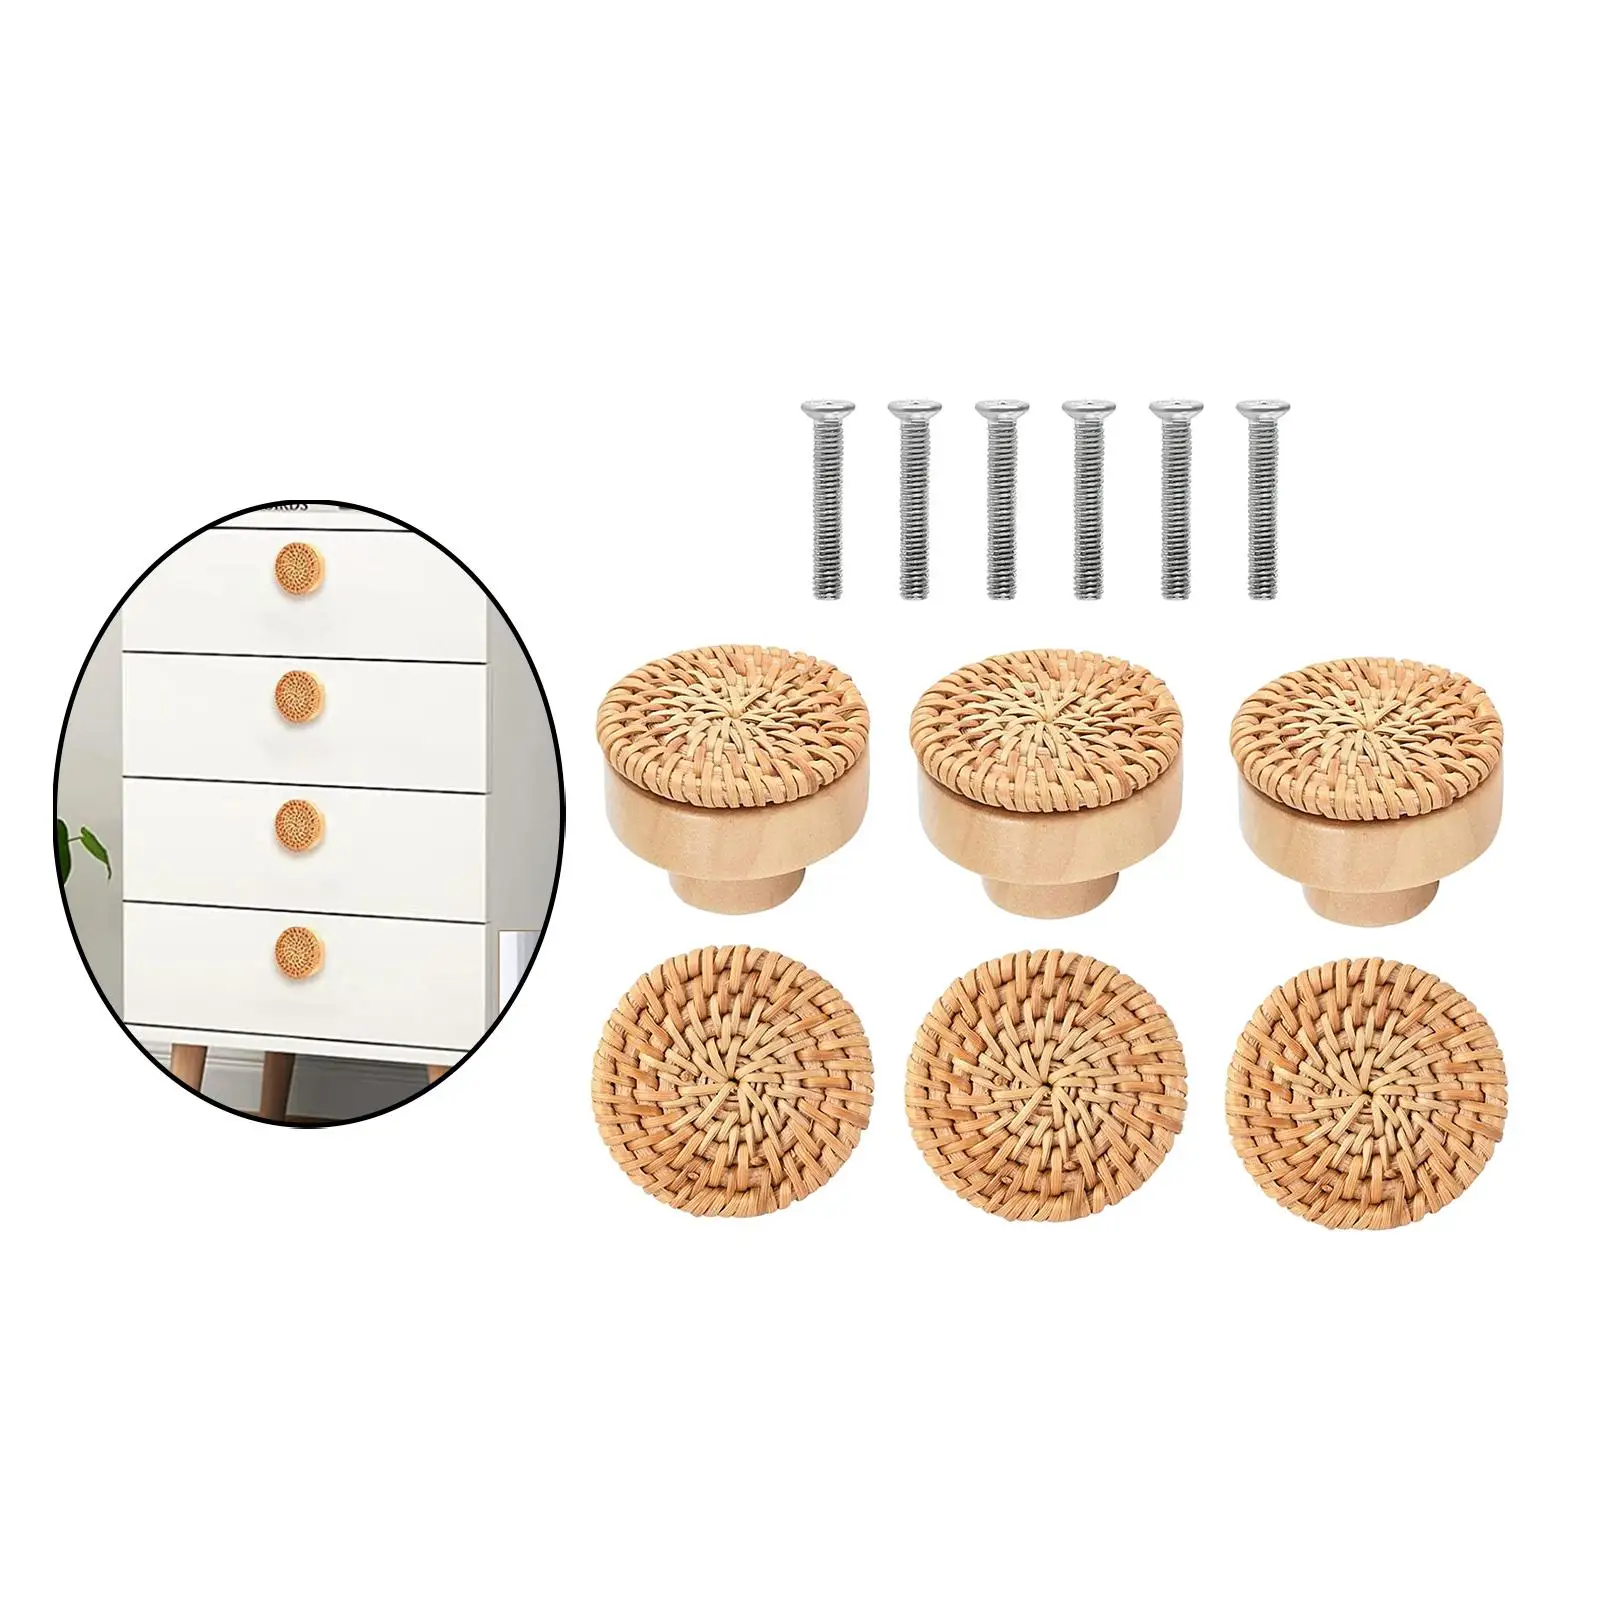 6x Rattan Drawer Knobs Easy to Install  for Cabinet Door Ornament